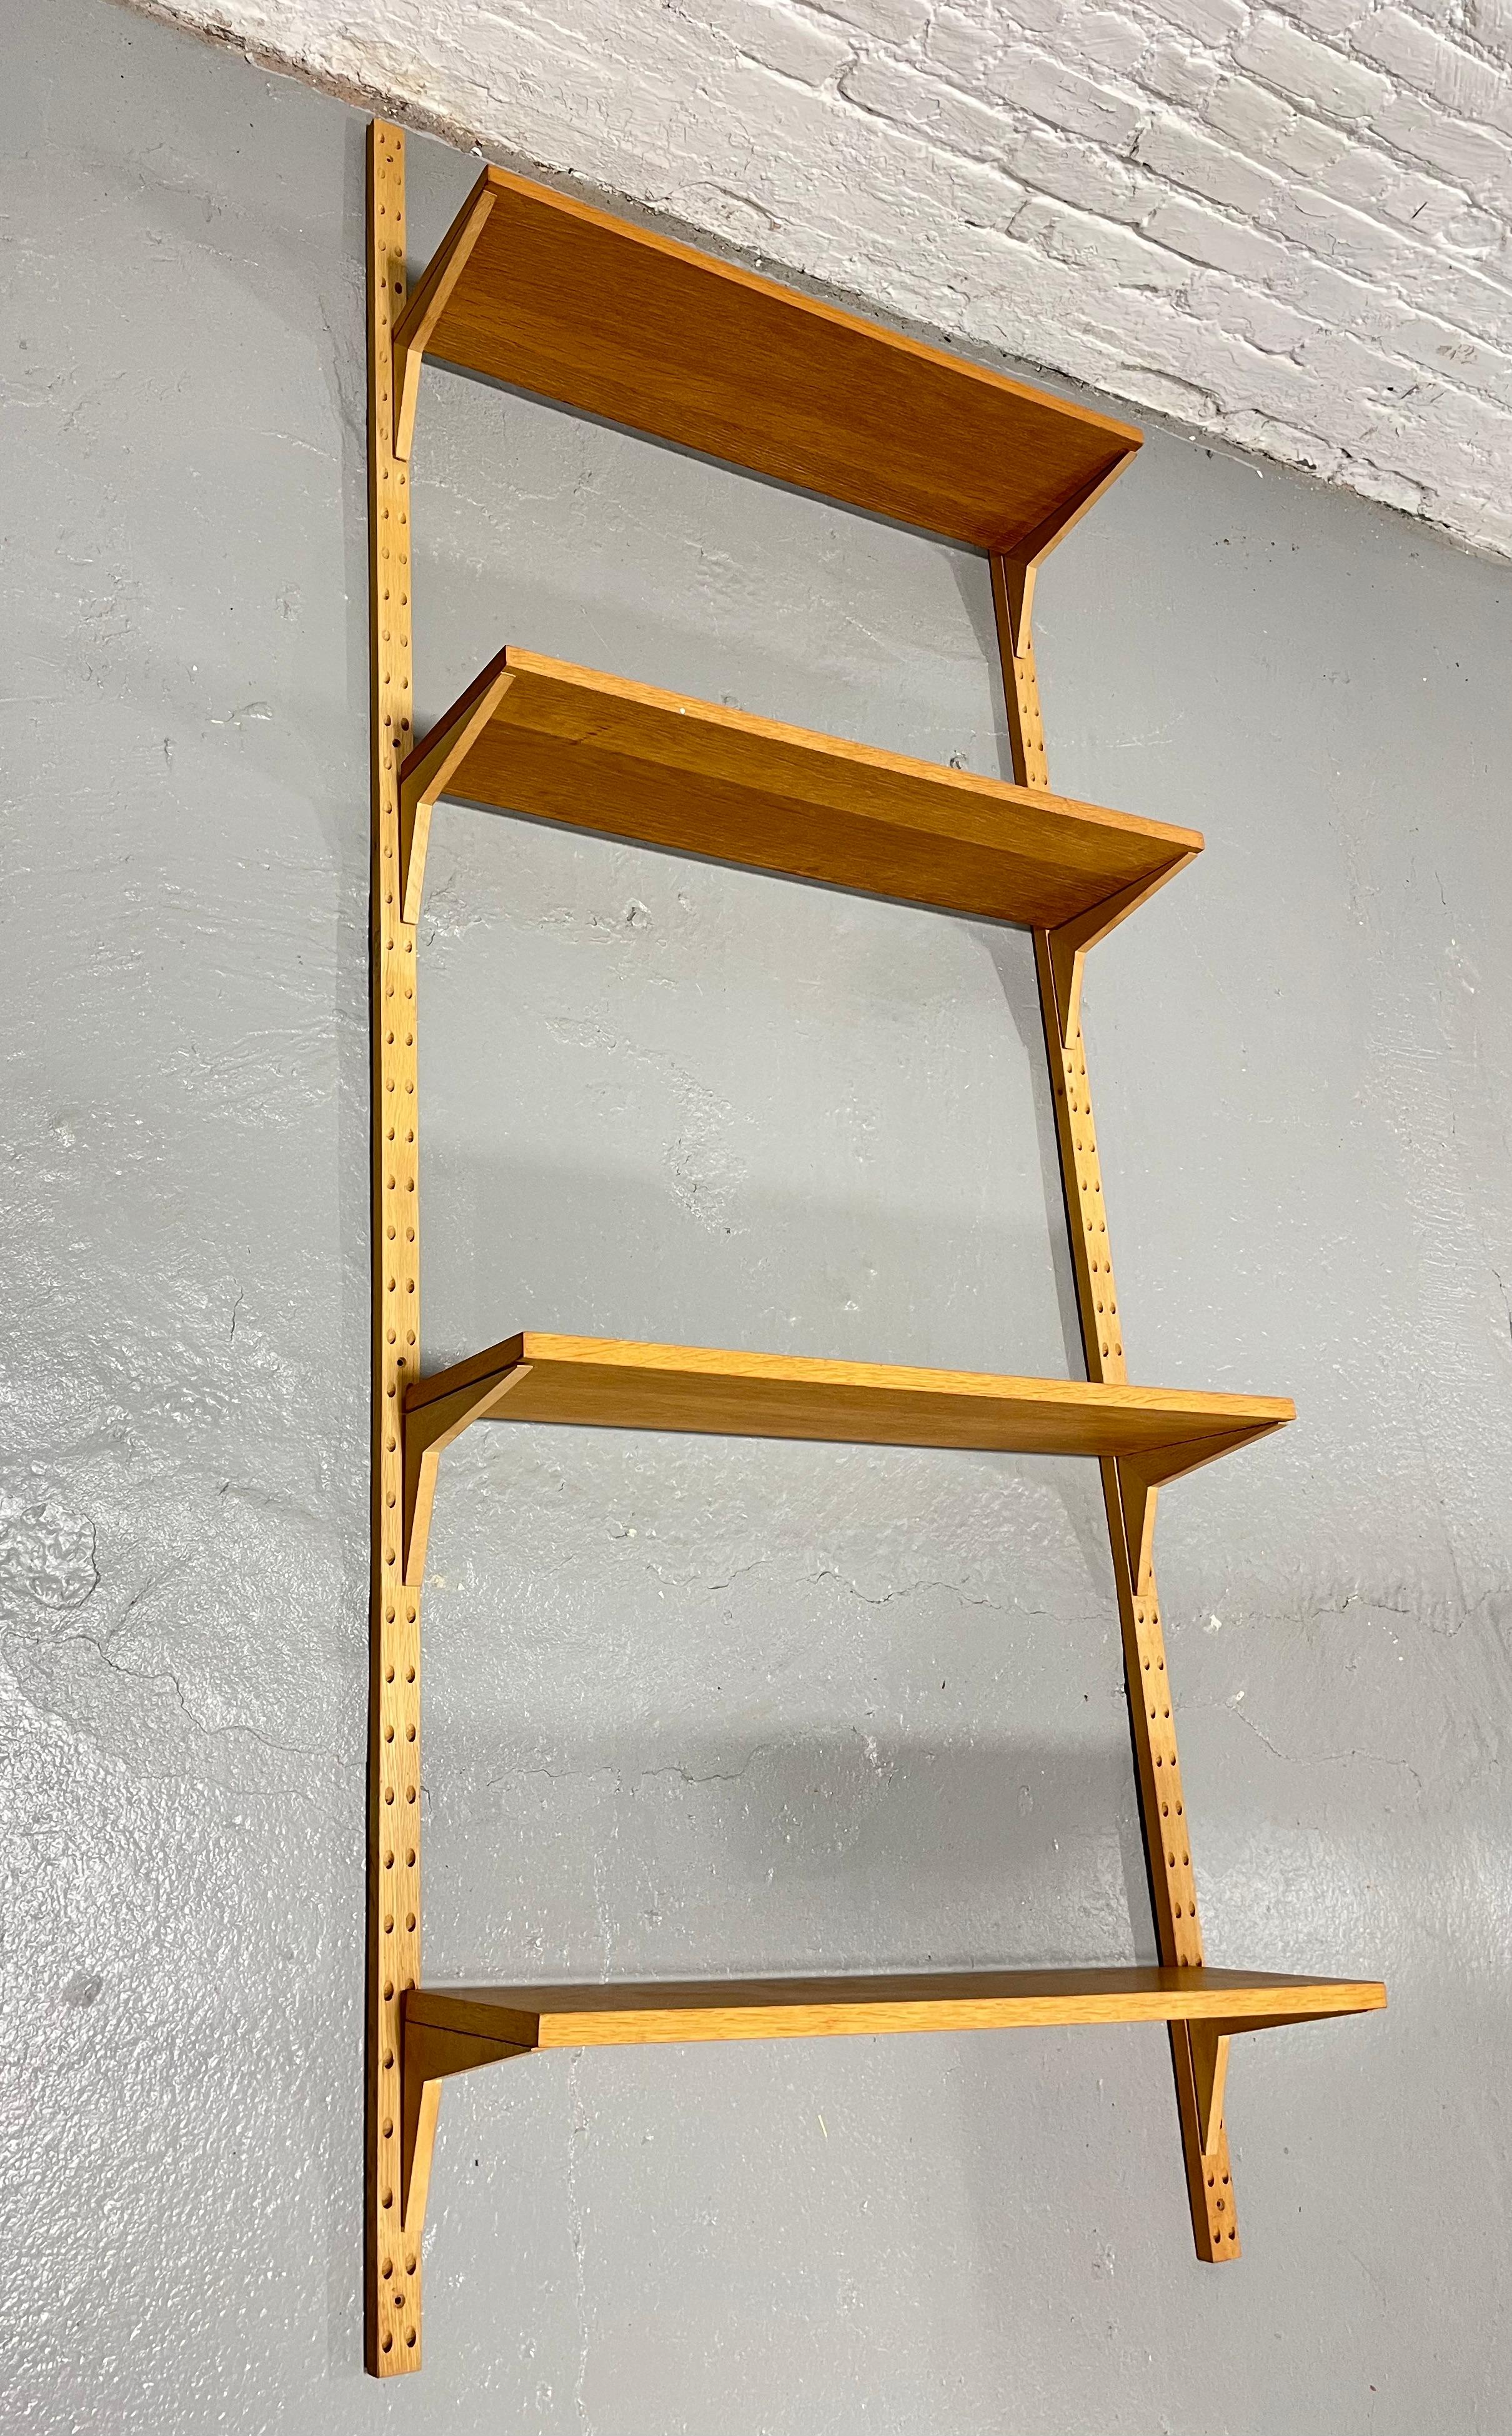 Orignial Danish Modern Mid Century Cado Wall Shelving System in hard to find light oak, c. 1960's. Great single bay unit consisting of four shelves that can be arranged anywhere on the rails. Each shelf is stamped 